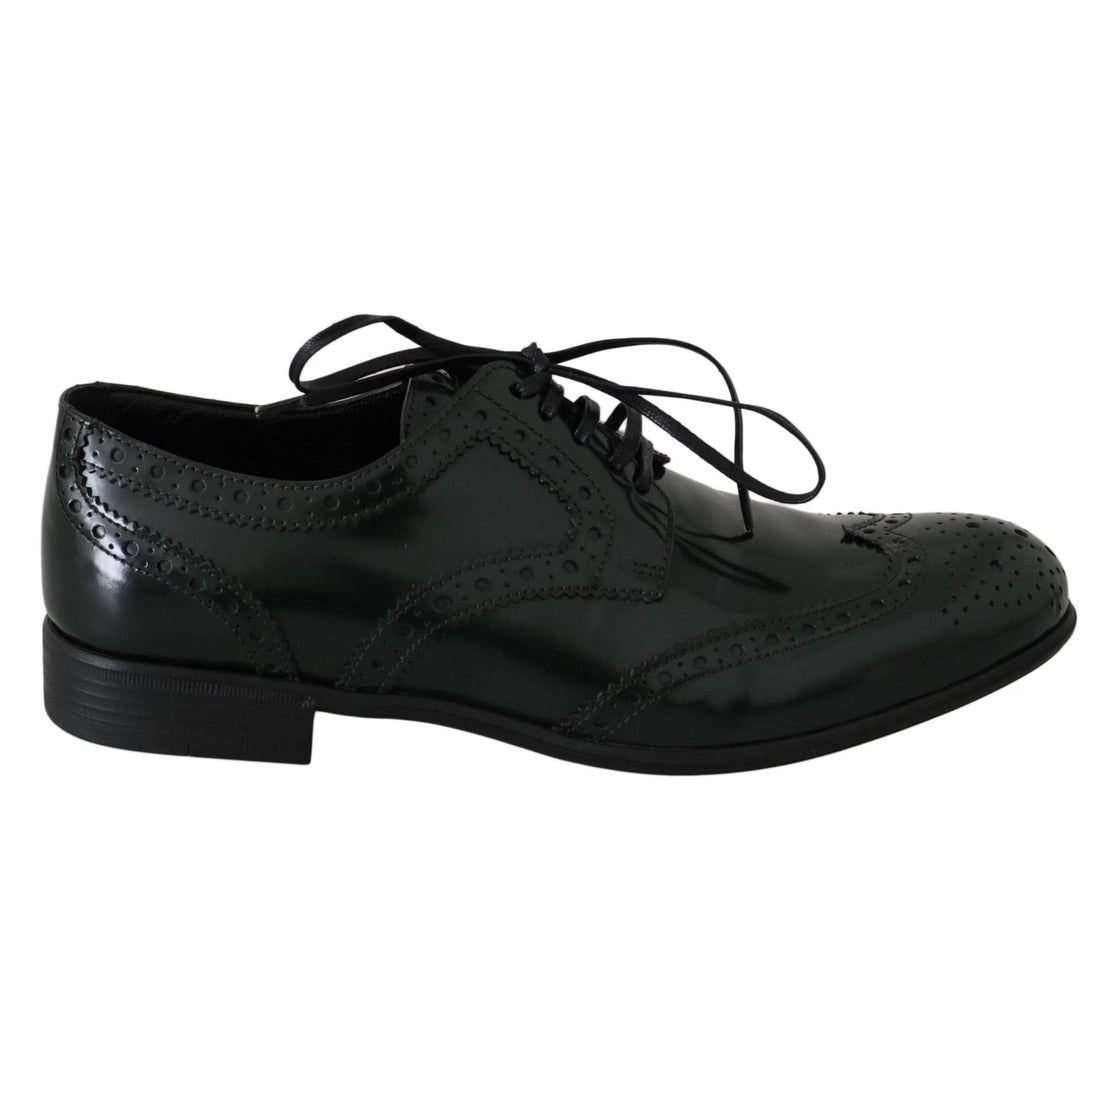 Dolce & Gabbana Green Leather Broque Oxford Wingtip Shoes - Paris Deluxe